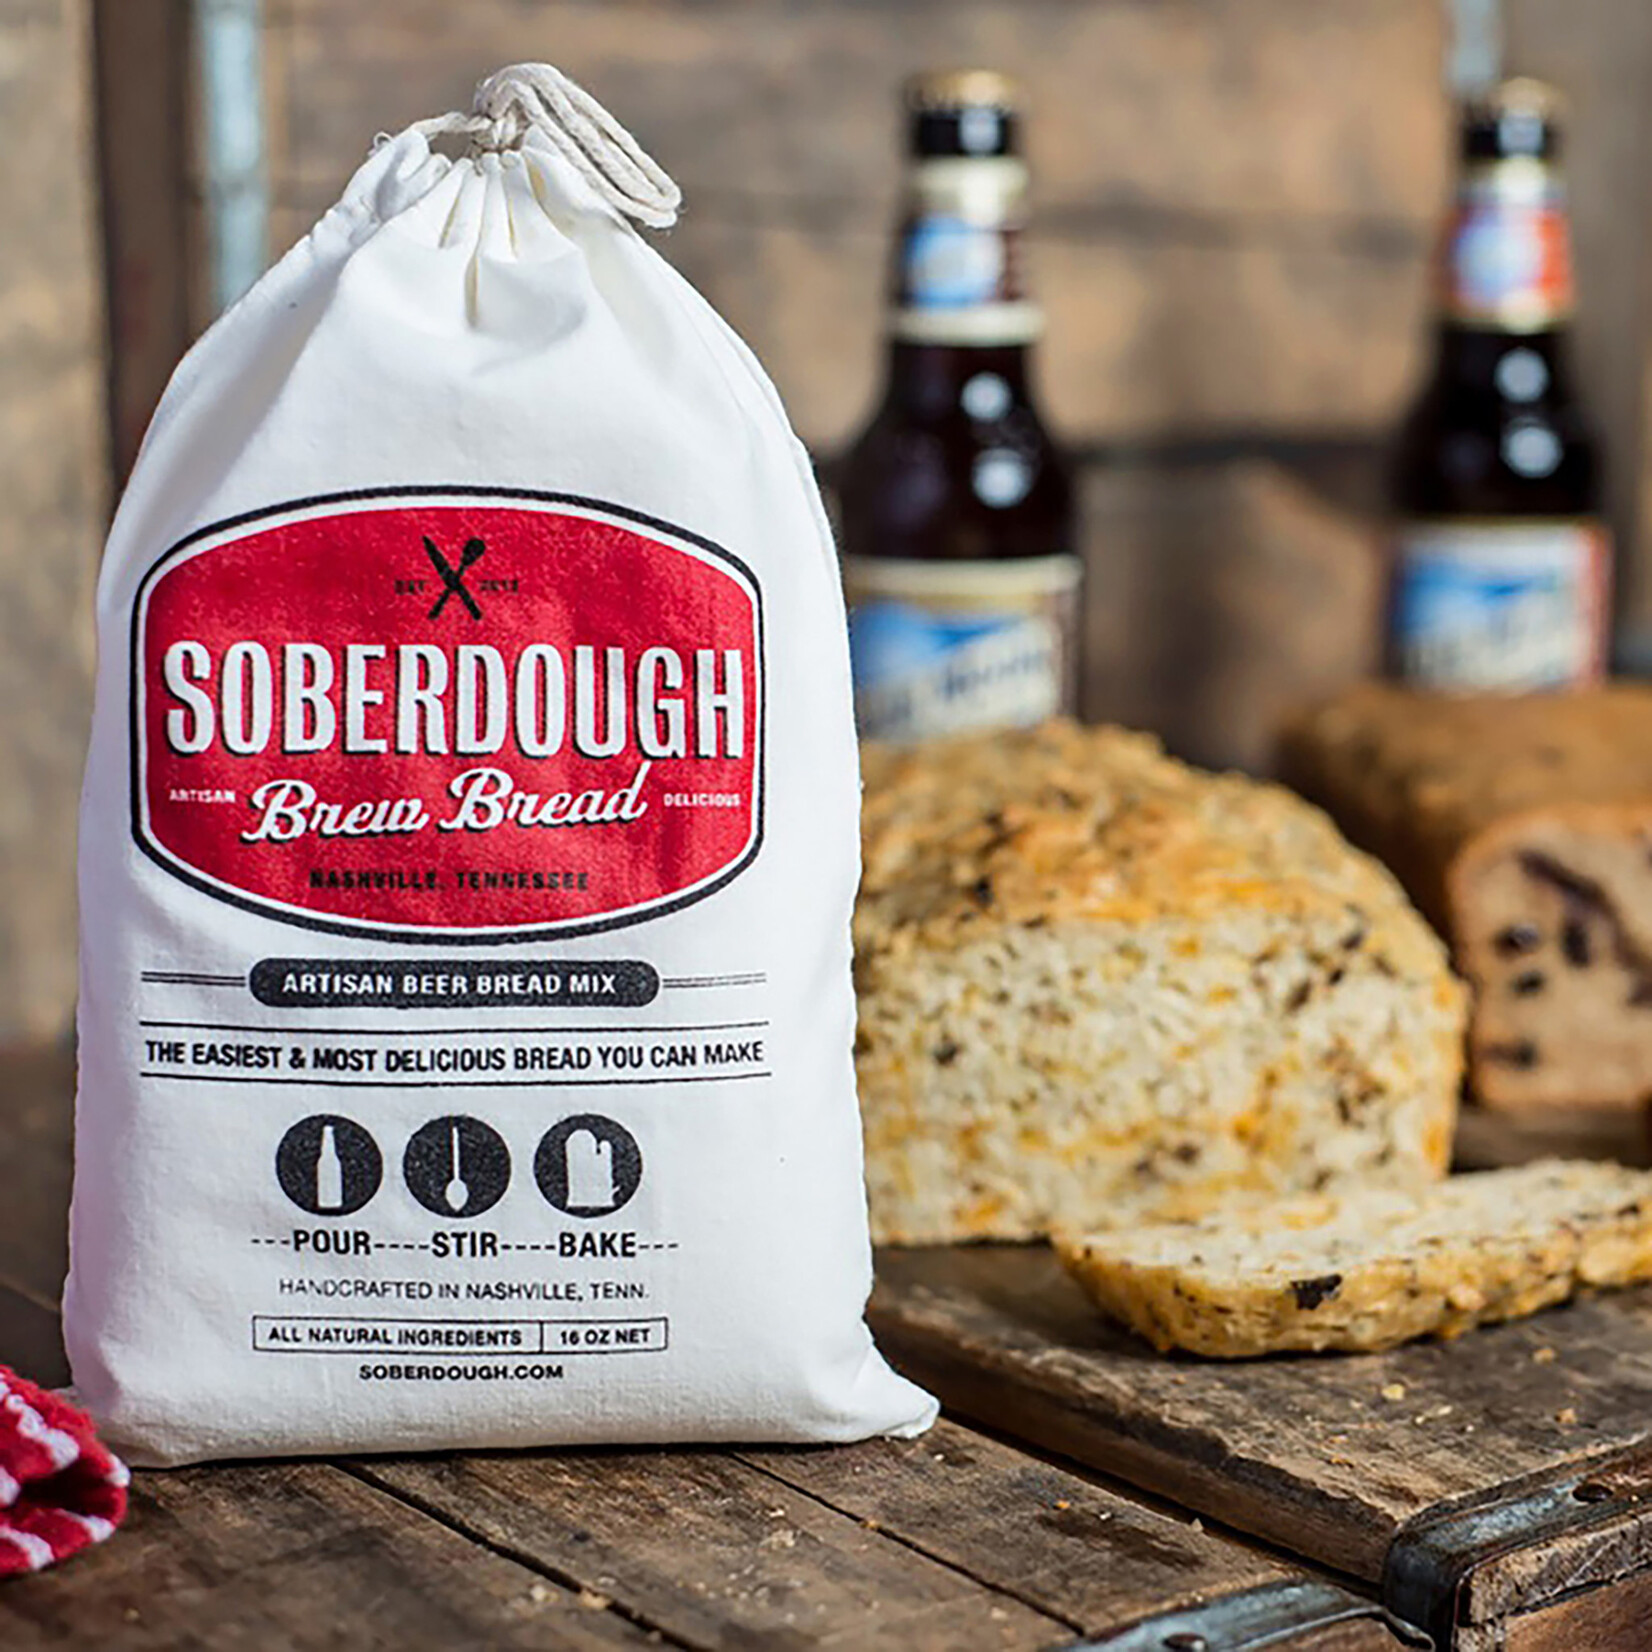 Soberdough Bread Mix: Everything But The Bagel